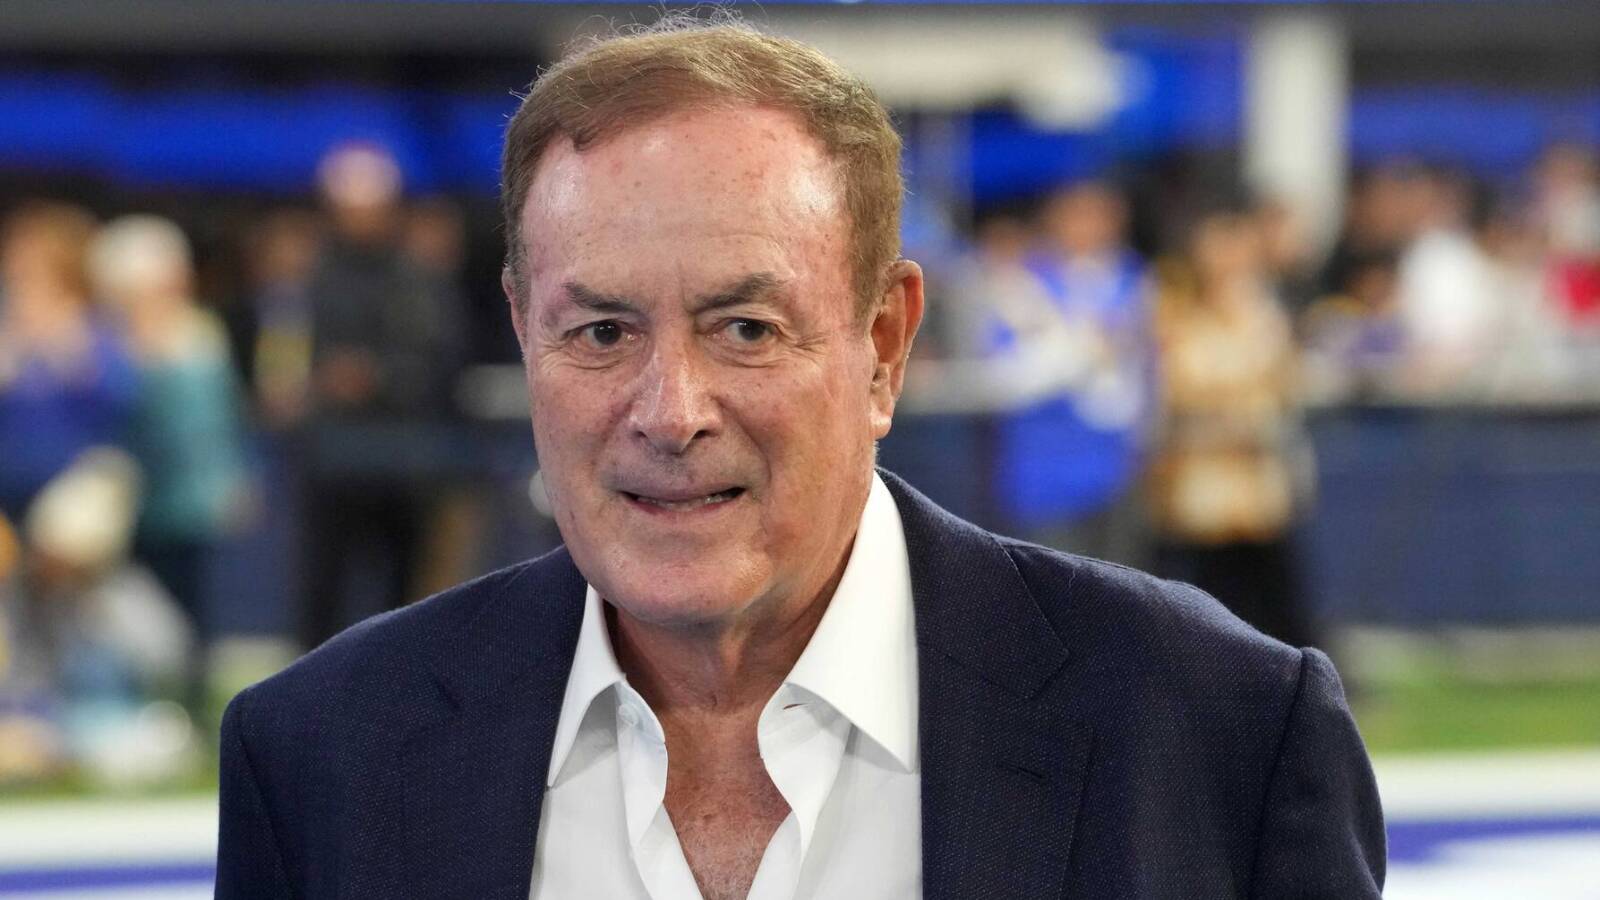 Watch: Al Michaels took funny shot at Astros over cheating scandal during 'TNF' game